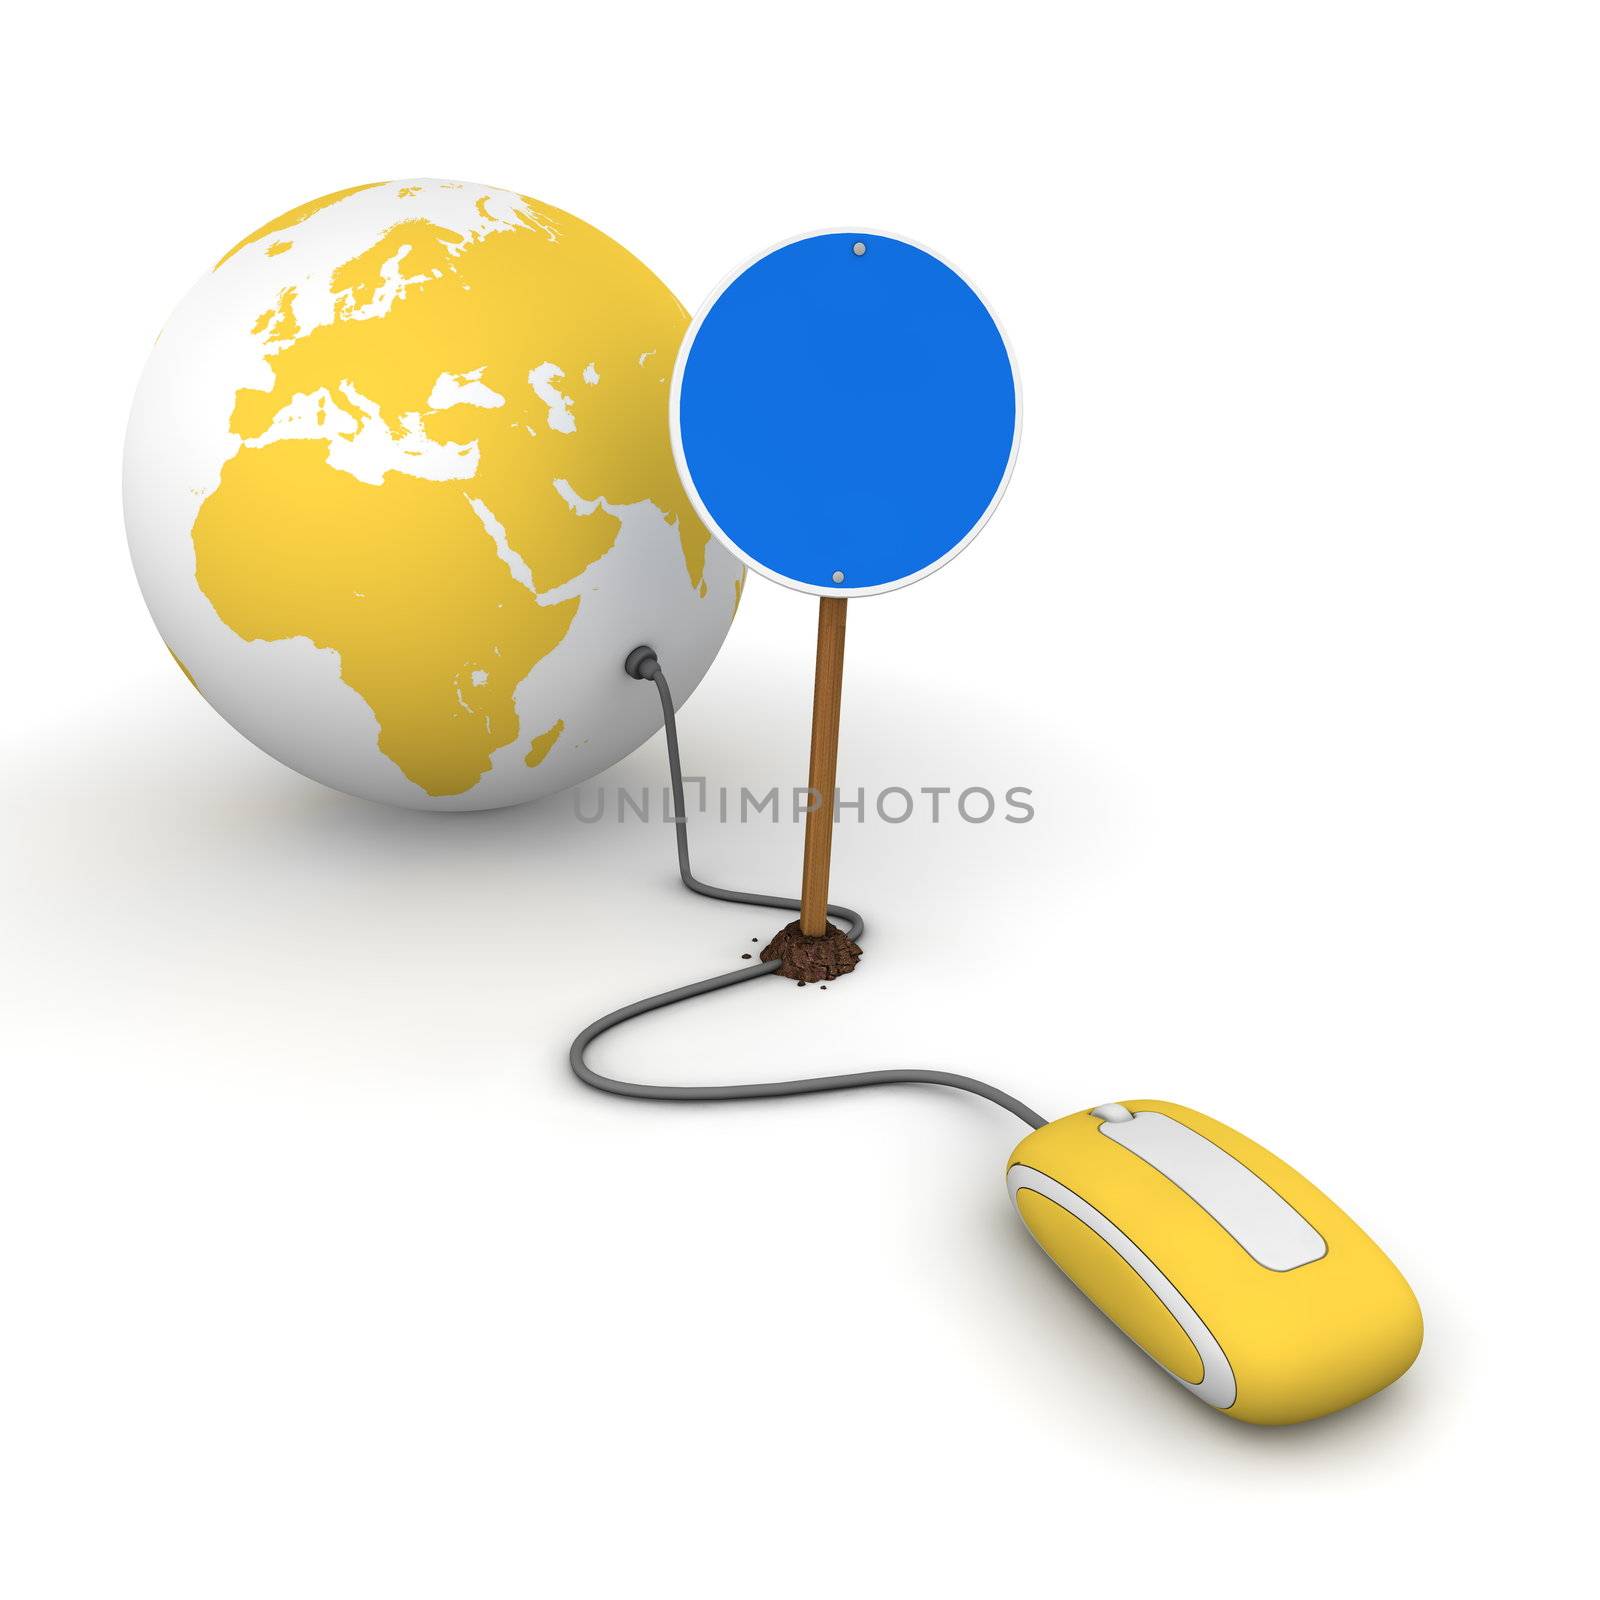 red computer mouse is connected to a yellow globe - surfing and browsing is blocked by a blue round mandatory-sign - empty template